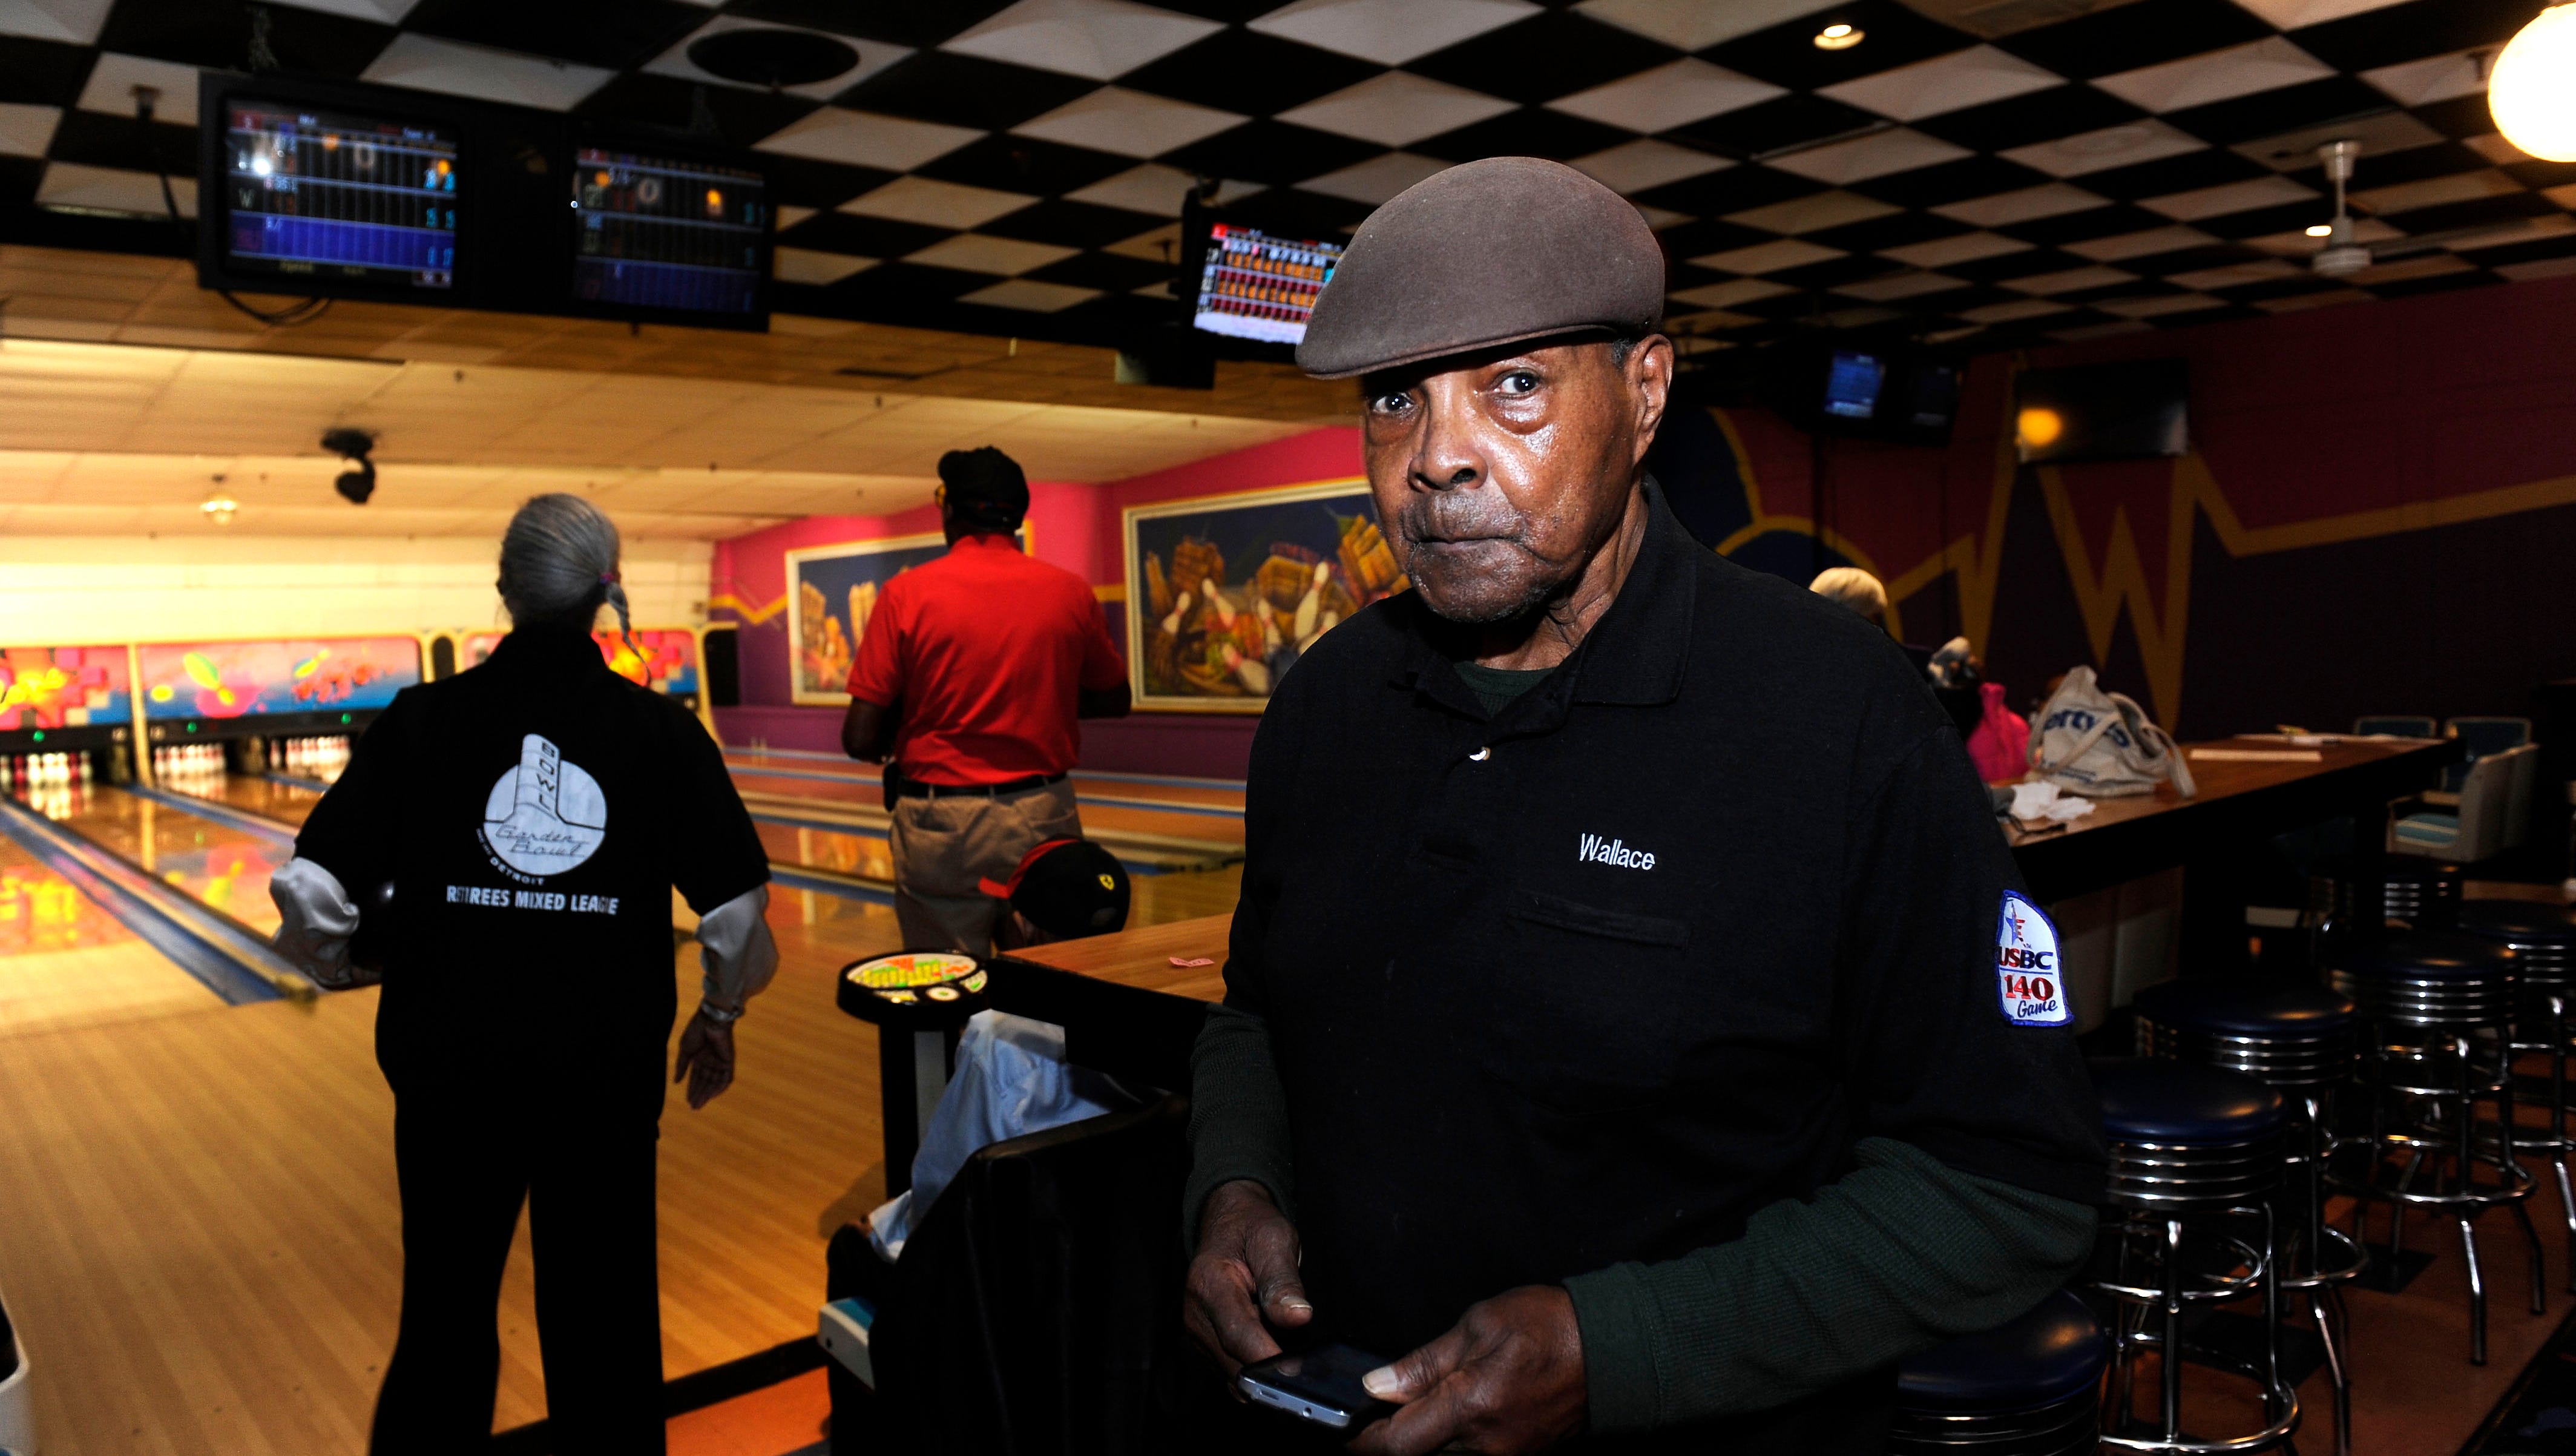 Lions veteran Wally Triplett, now nearly 89,  bowling at Garden Bowl in Detroit on  Feb. 18, 2015. Triplett — Bobby Layne’s teammate, Jackie Robinson’s friend — is a black man who staunchly still calls himself a Negro.